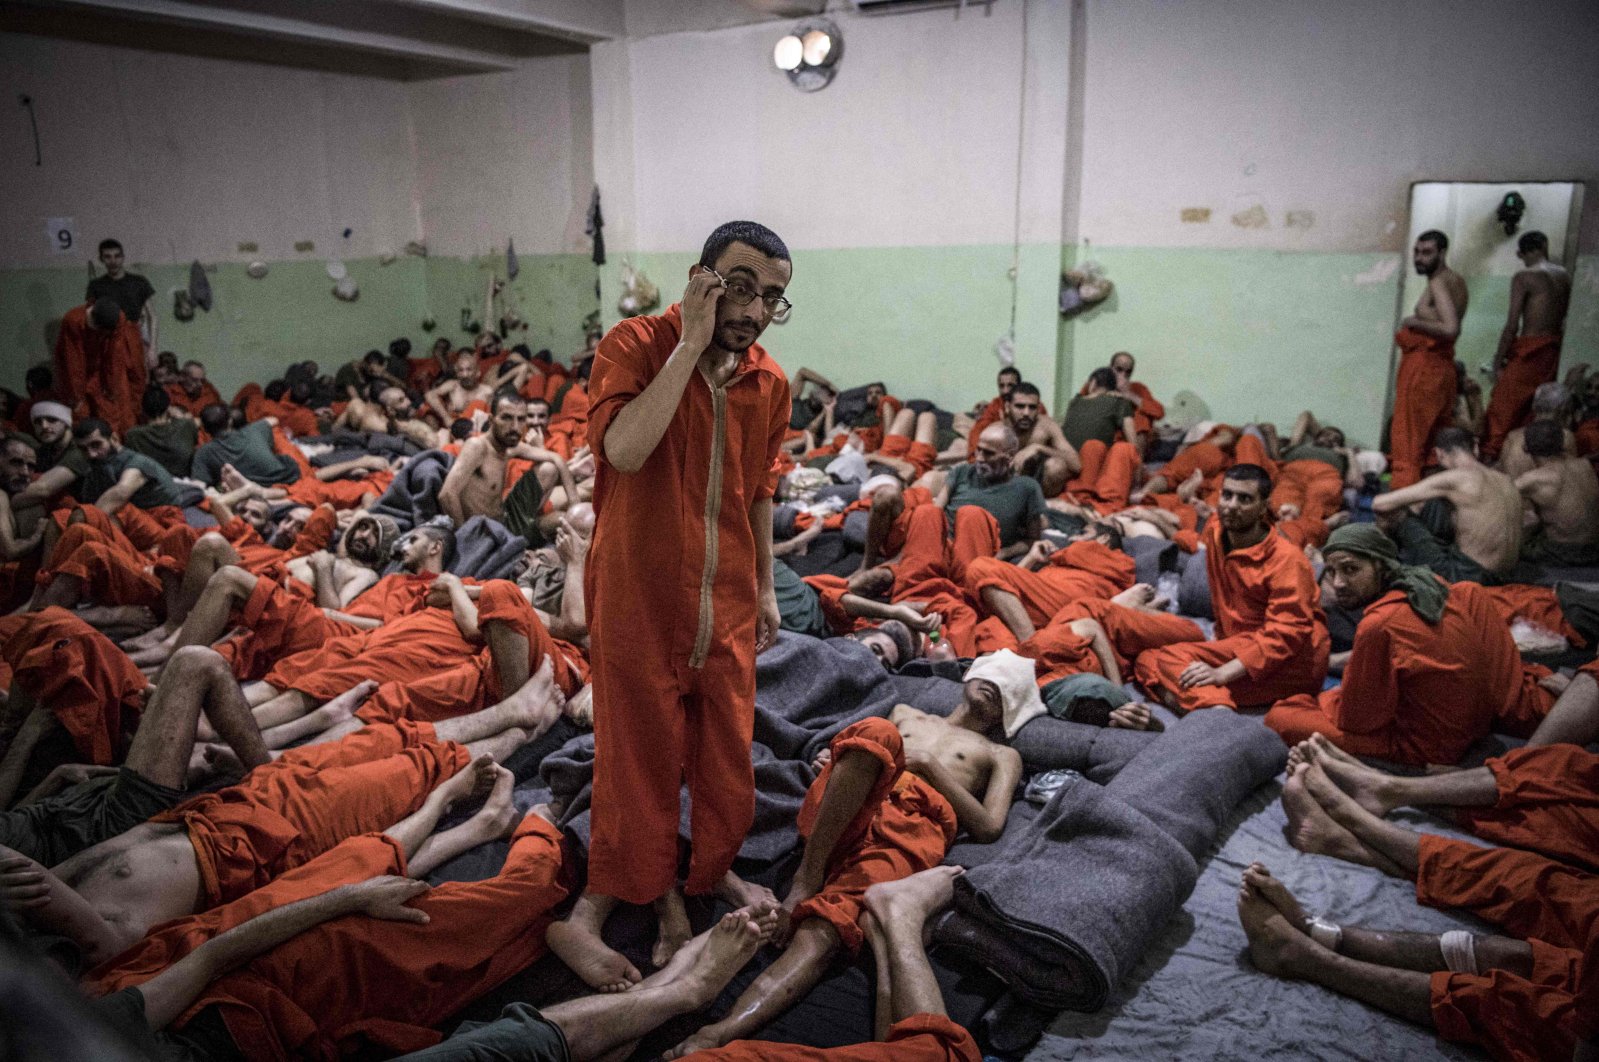 Men suspected of being affiliated with Daesh gather in a cell of the Sinaa prison in the Ghwayran neighborhood of the northeastern city of Hassakeh, Syria, Oct. 26, 2019. (AFP Photo)